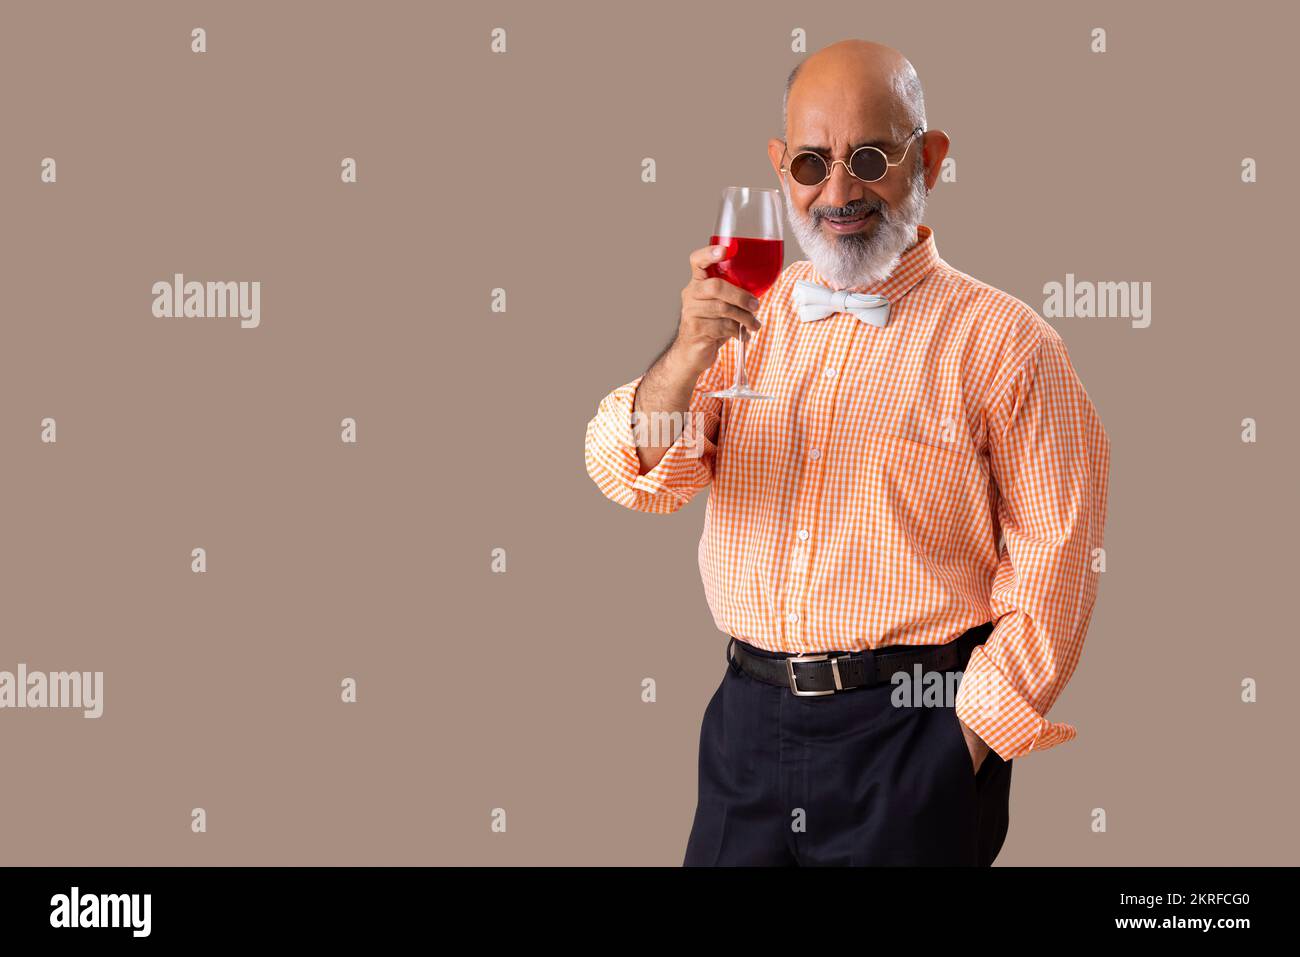 Senior man cheering with a glass of red wine Stock Photo